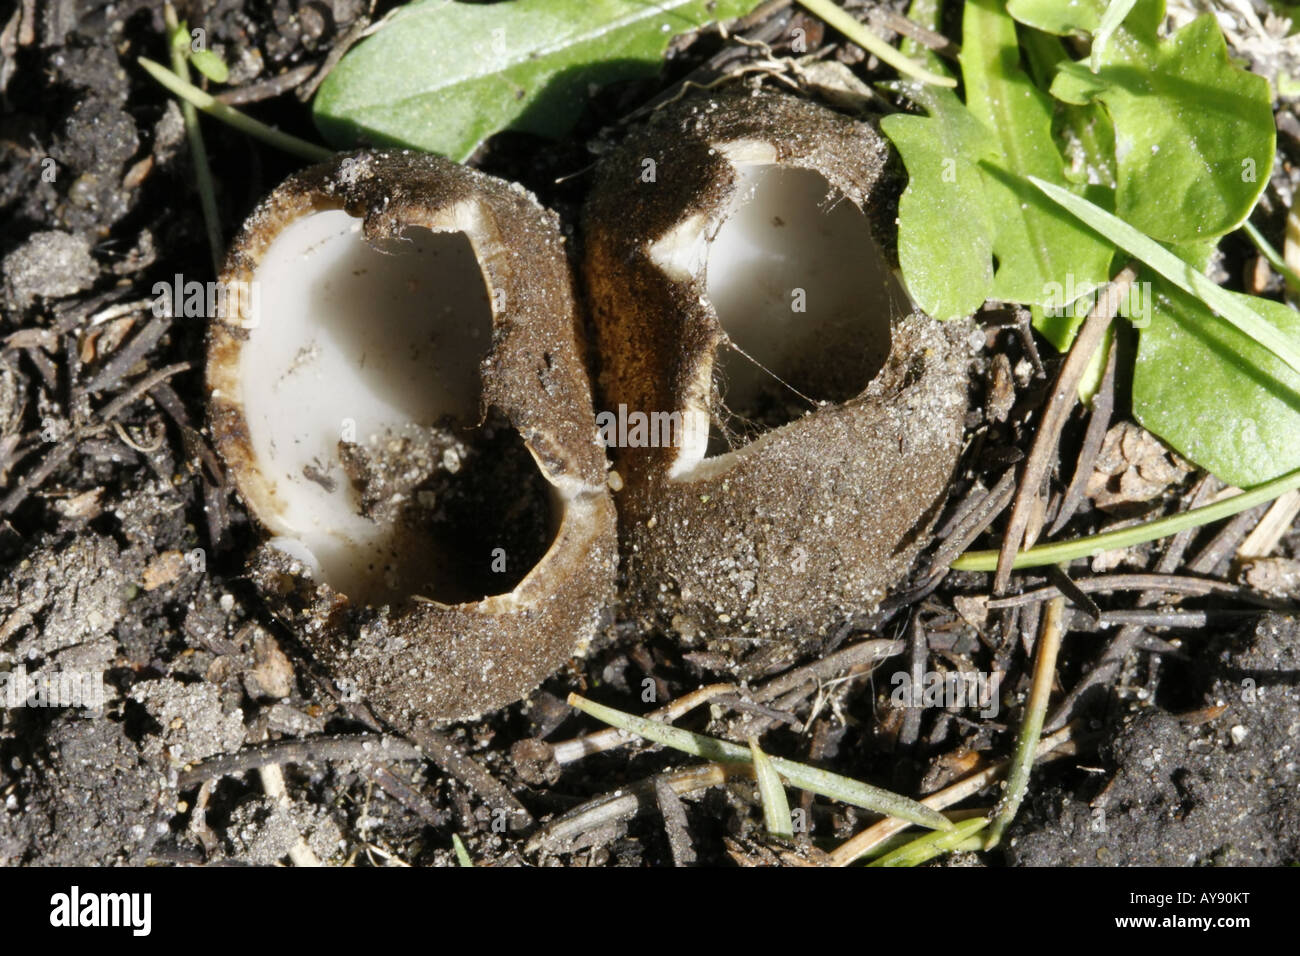 Pair of Cedar Cup fungi geopora sumneriana at an early stage of fruiting Stock Photo